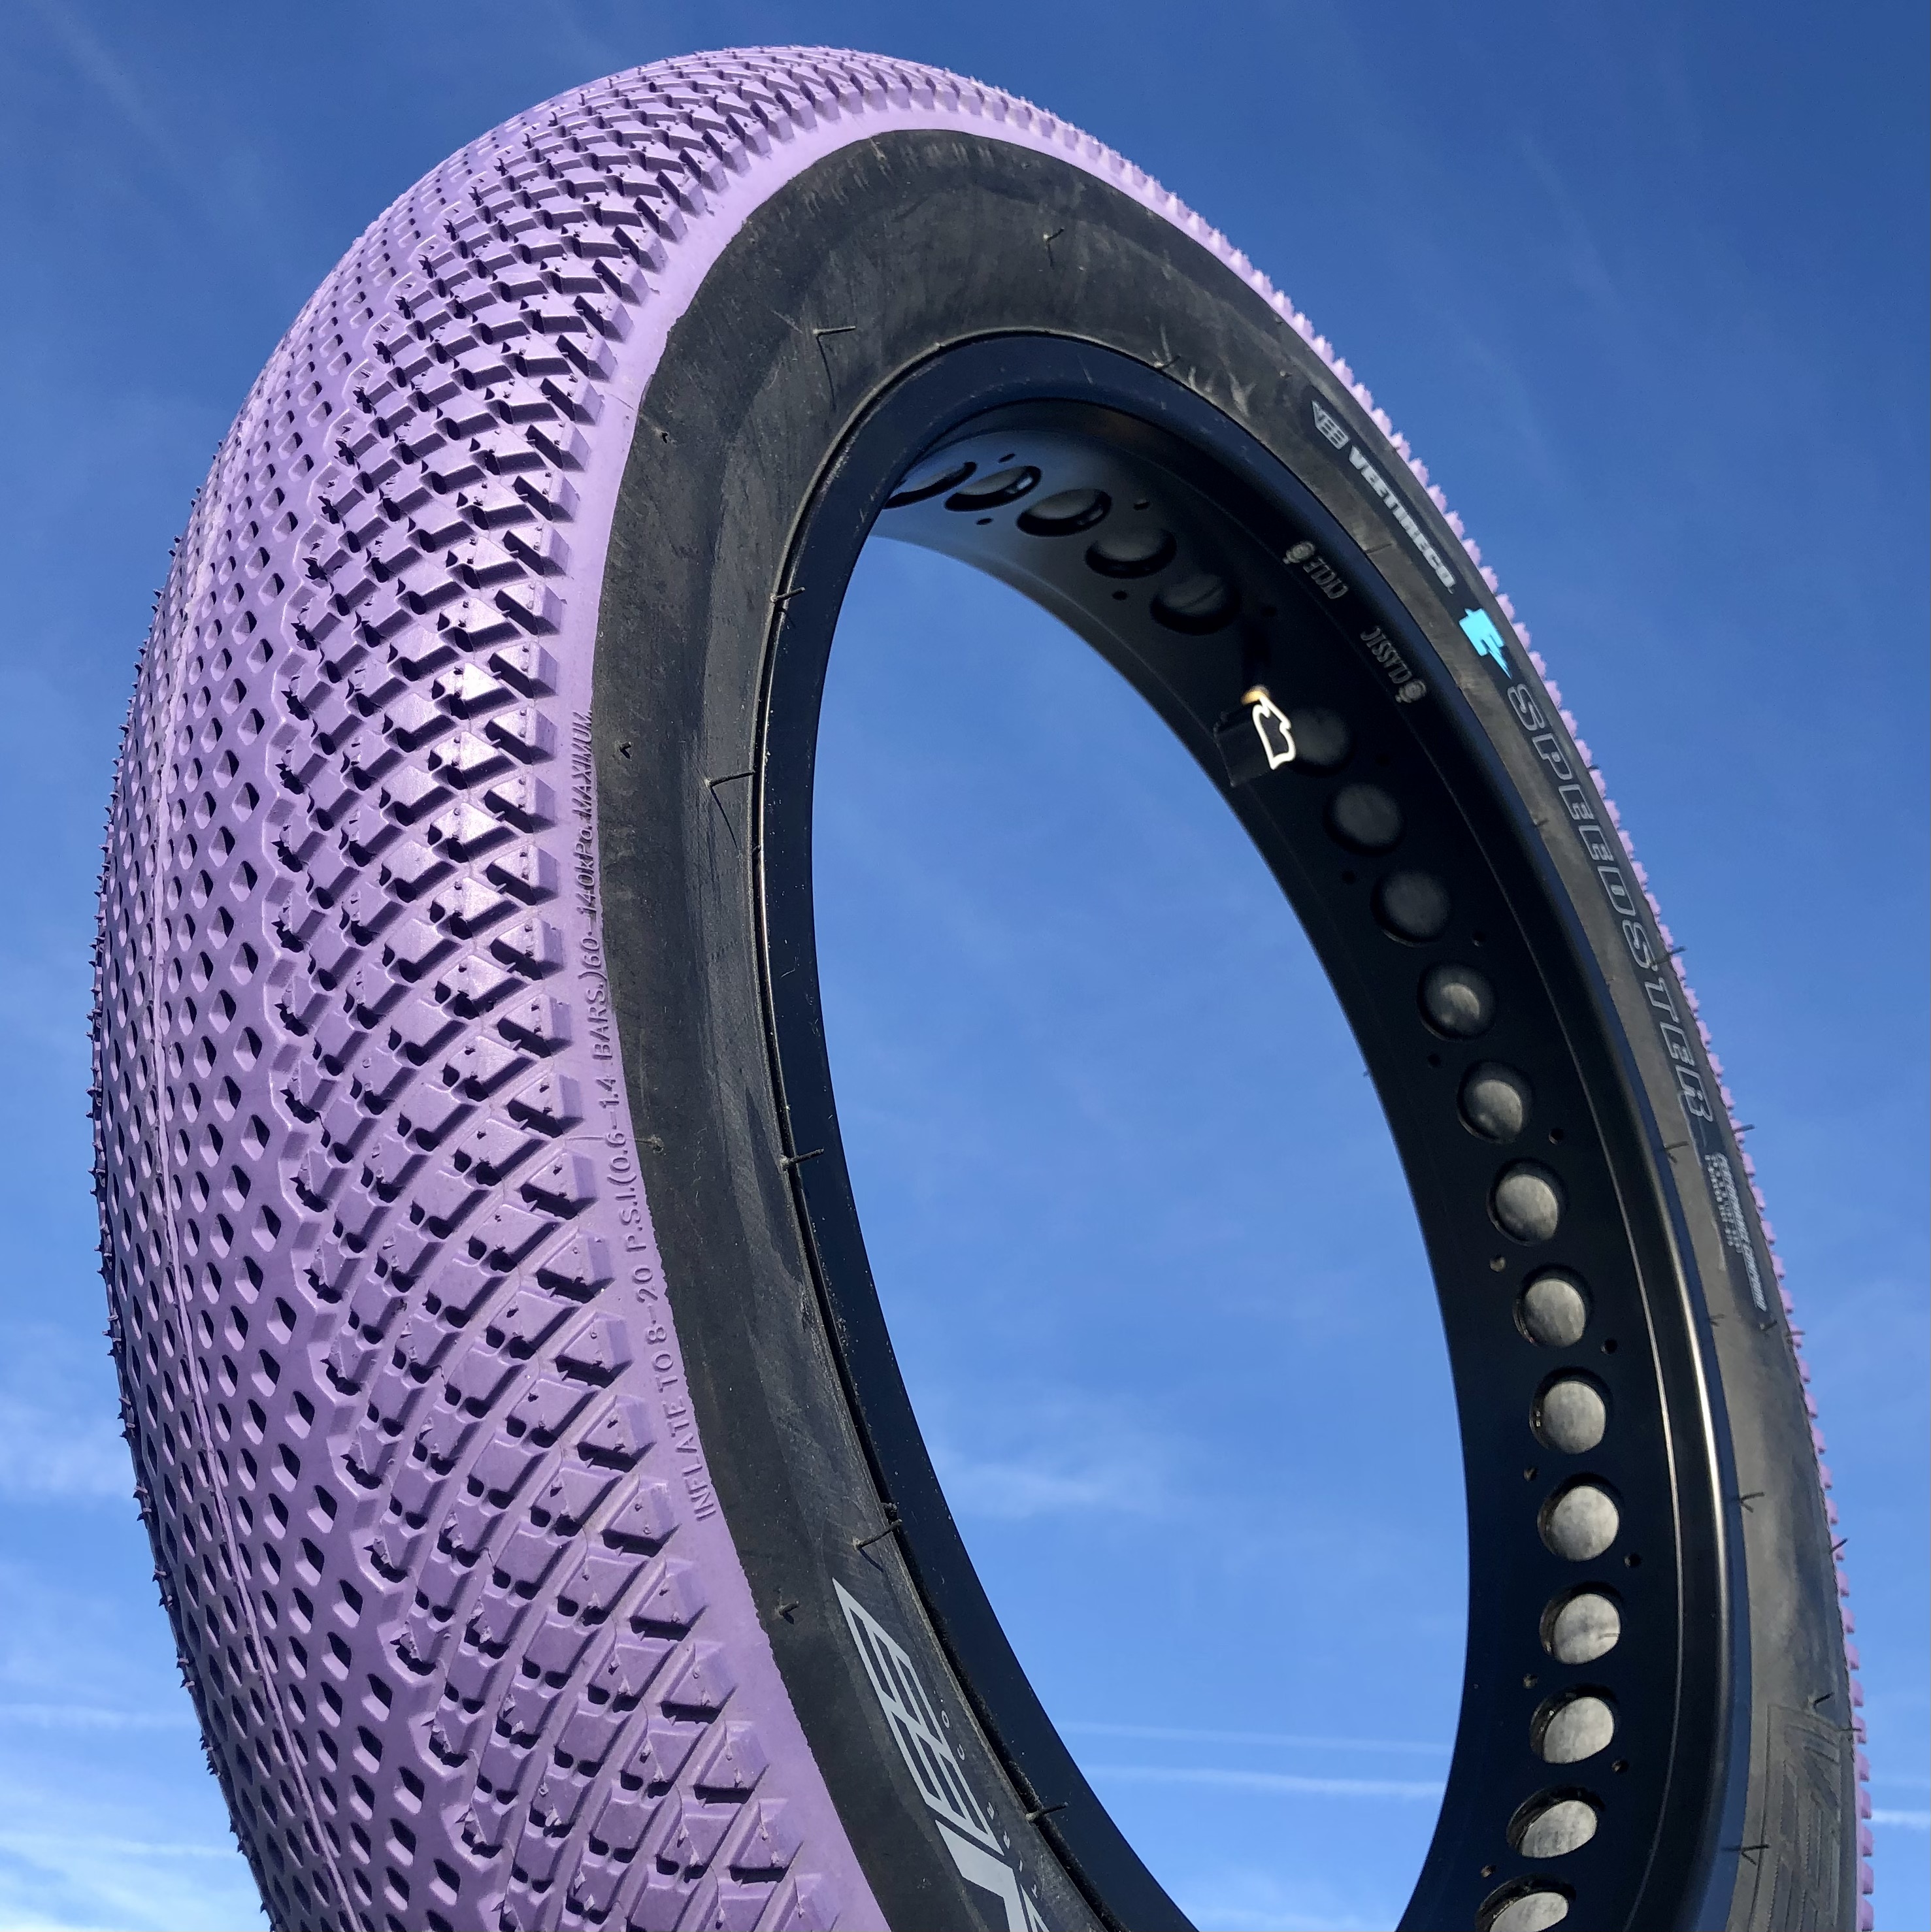 Limited Edition E-Speedster purple with black sidewall,  Tire 20 x 4  inch